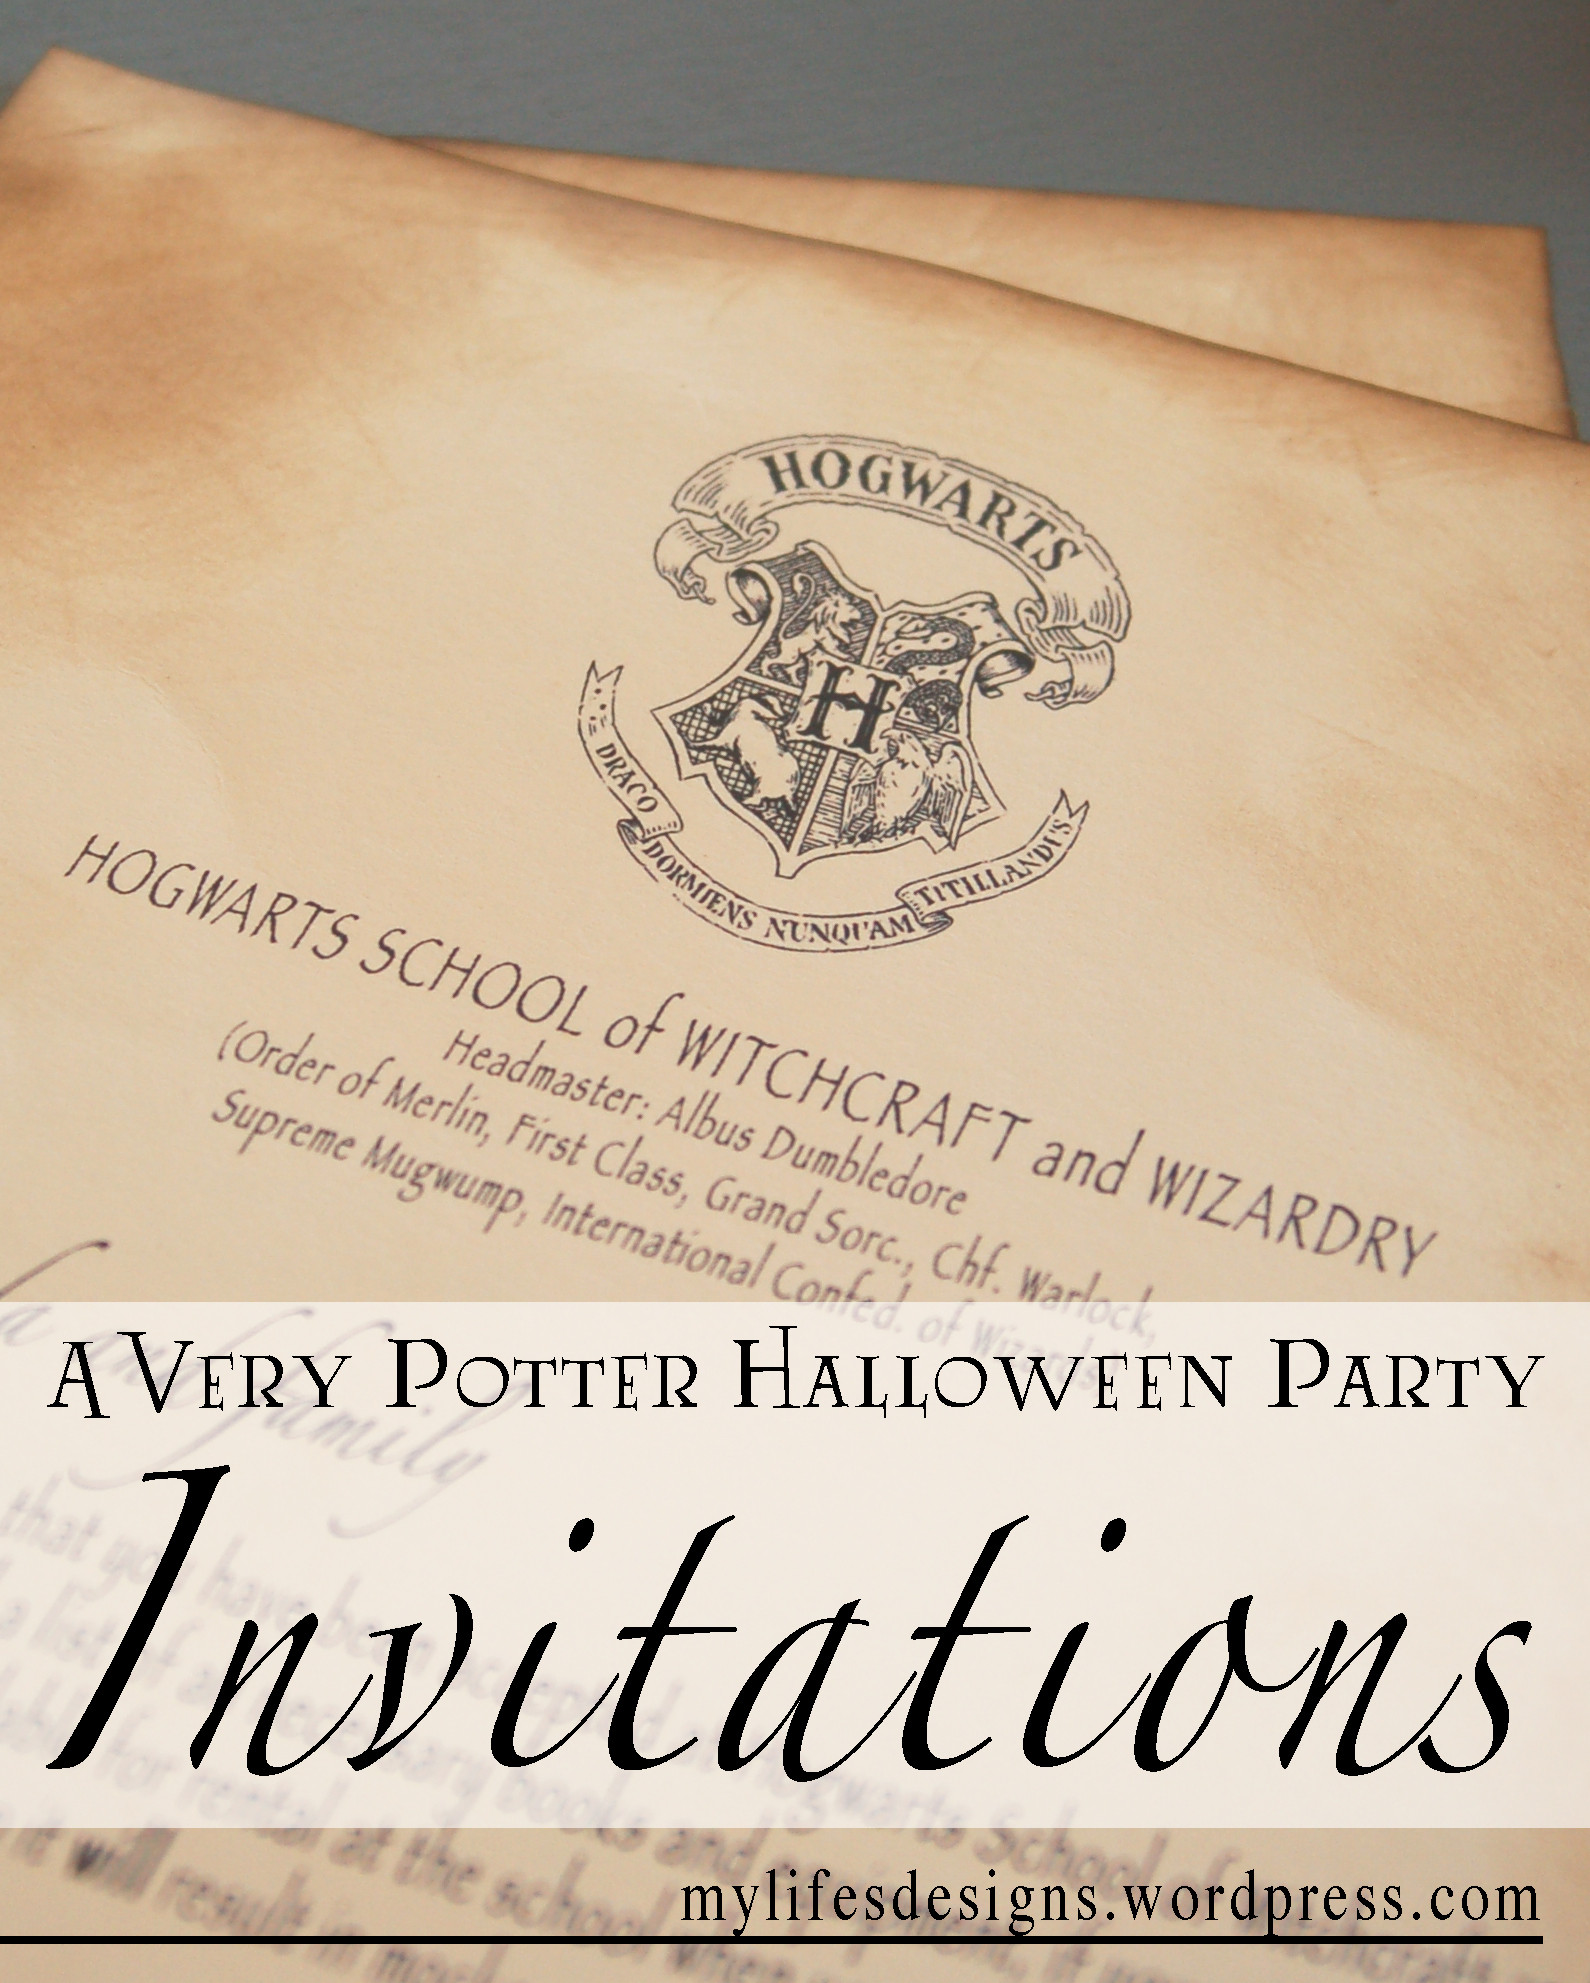 Harry Potter Birthday Invitations
 A Very Potter Halloween Party Invitations – My Life s Designs